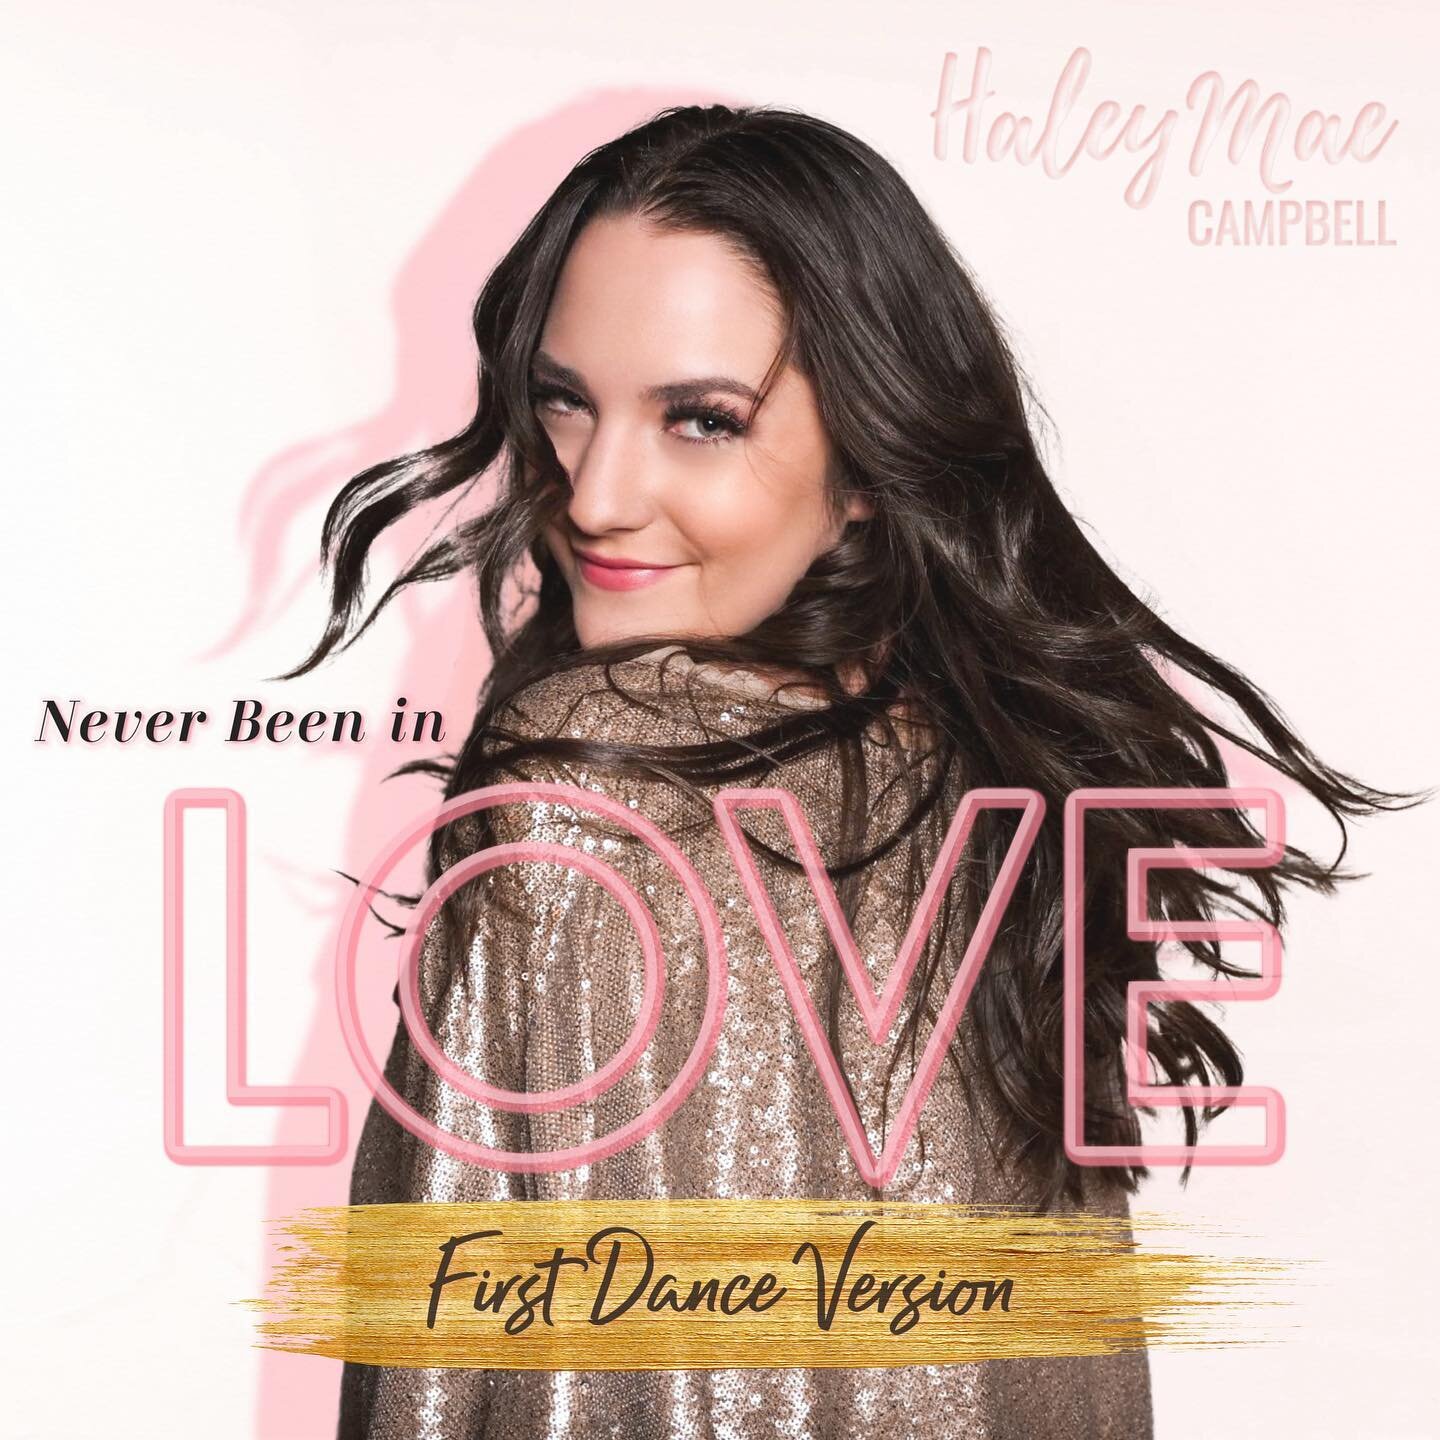 For all your tender moments 💖 the &ldquo;Never Been in Love (First Dance Version)&rdquo; out August 6th. Link in bio to pre-order✨